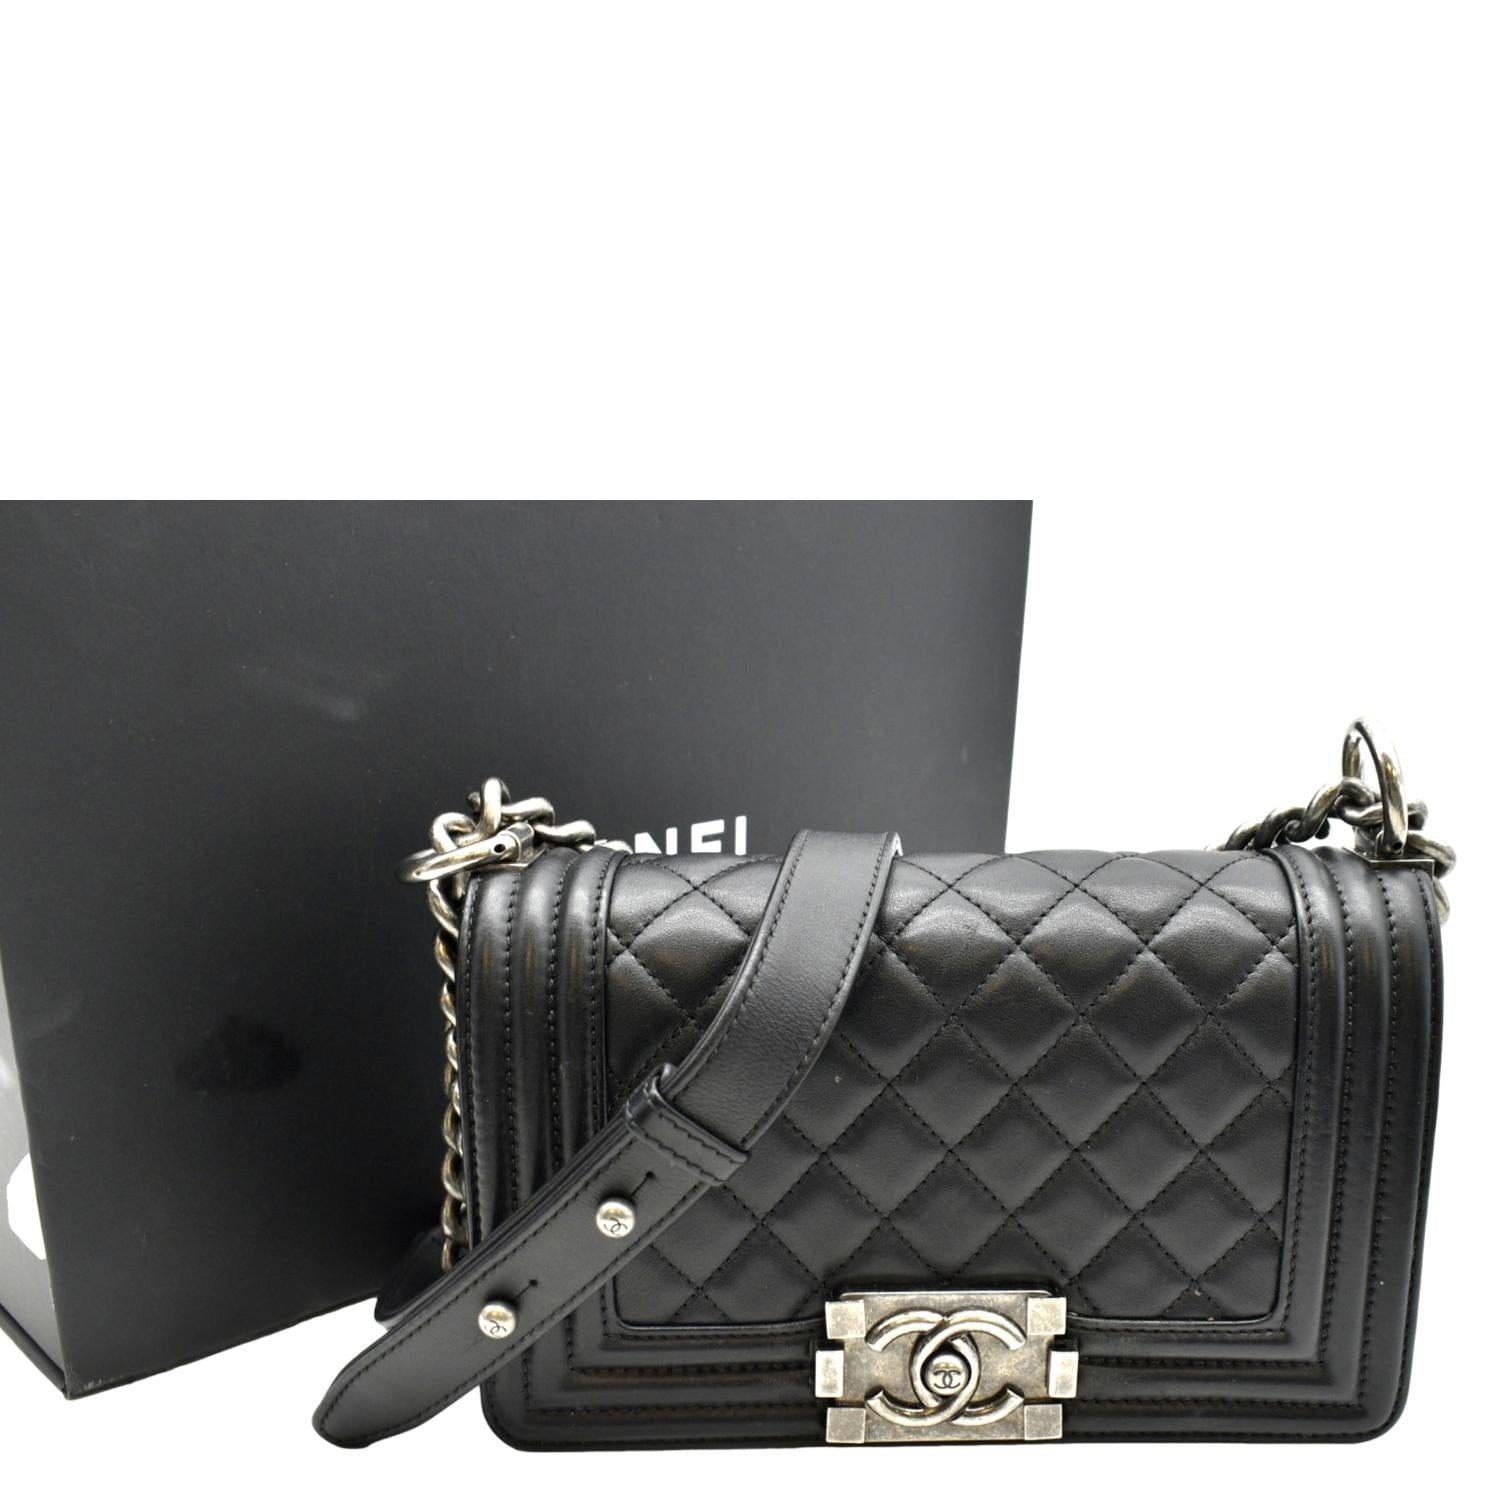 CHANEL Boy Small Quilted Lambskin Leather Shoulder Bag Black